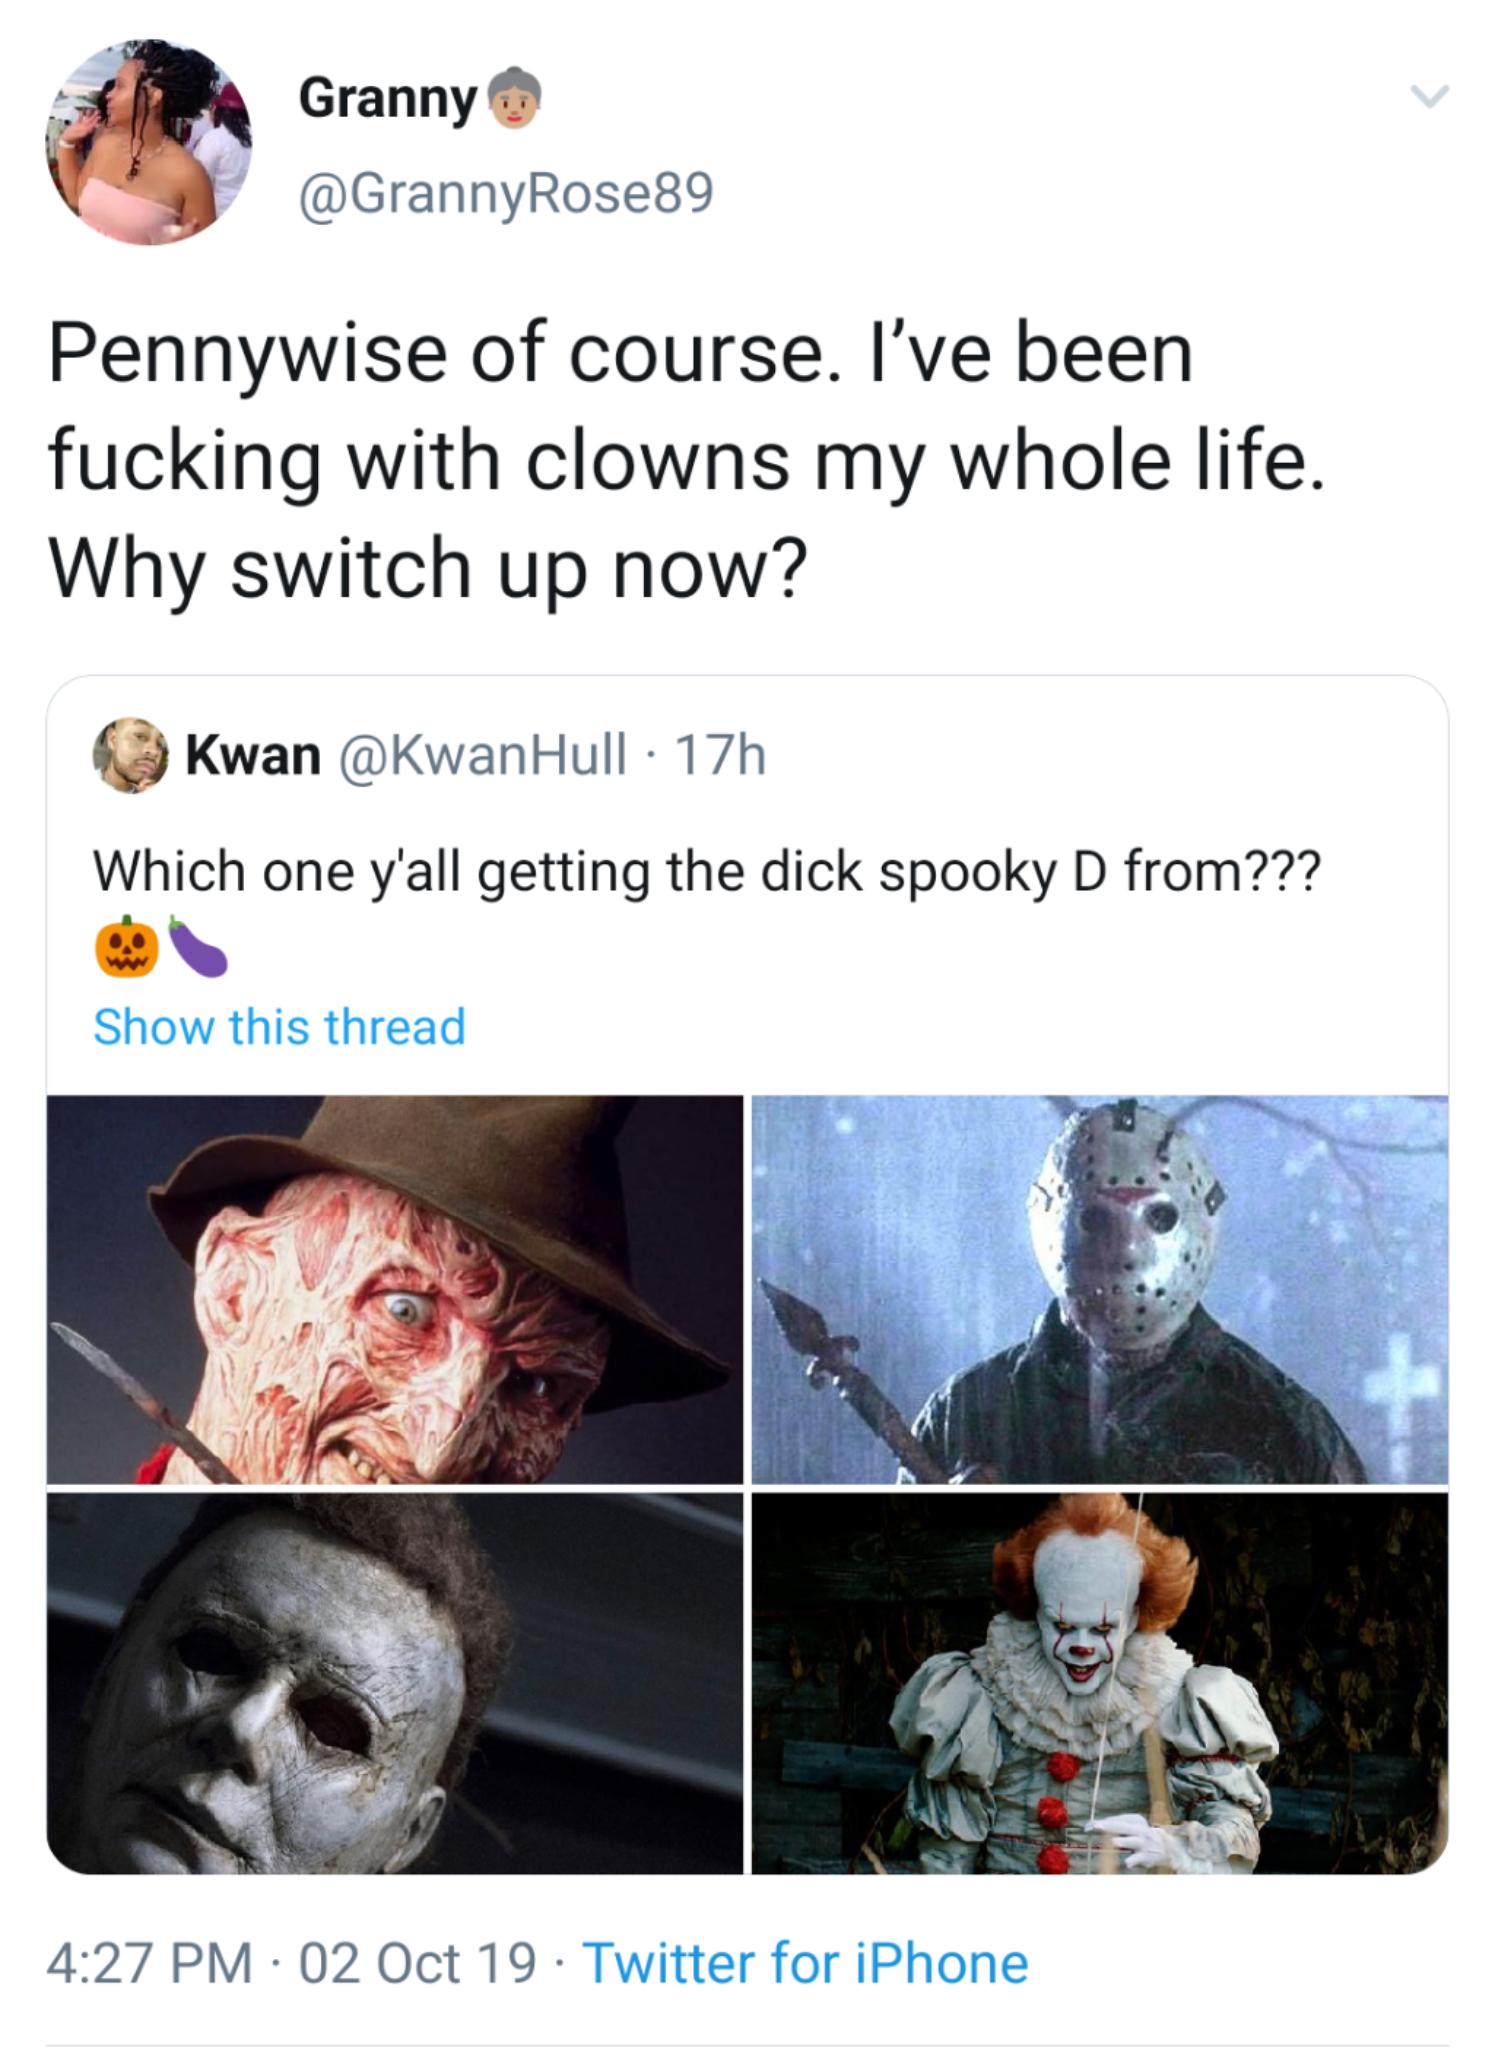 black twitter - Granny Pennywise of course. I've been fucking with clowns my whole life. Why switch up now? Kwan 17h Which one y'all getting the dick spooky D from??? Show this thread 02 Oct 19 Twitter for iPhone